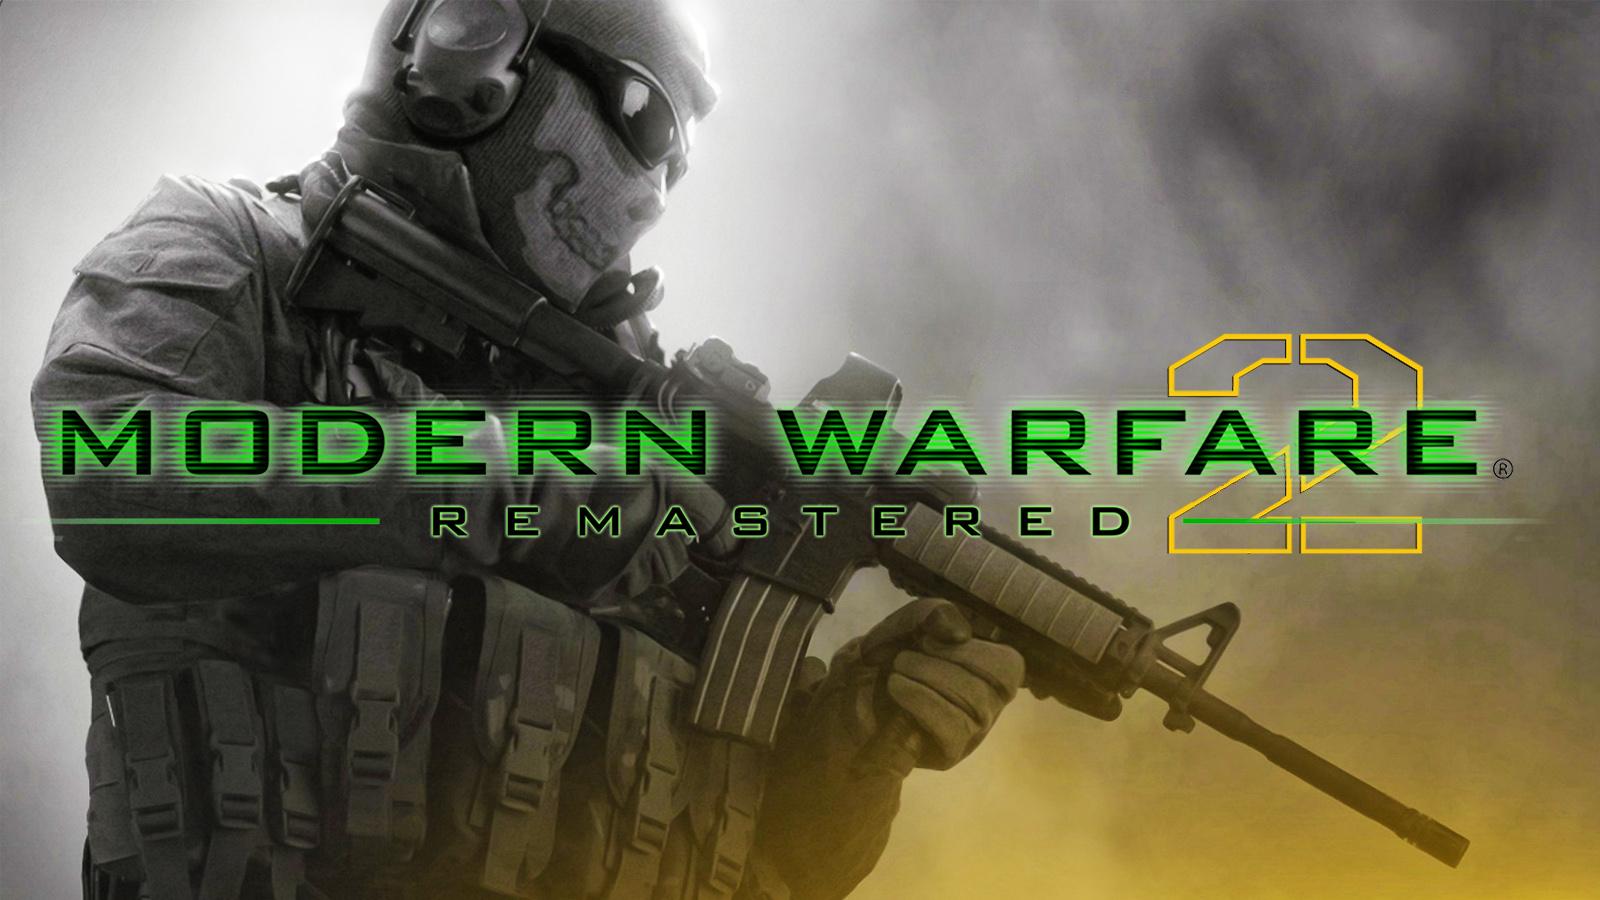 Leaker claims MW2 Remastered release date is sooner than expected